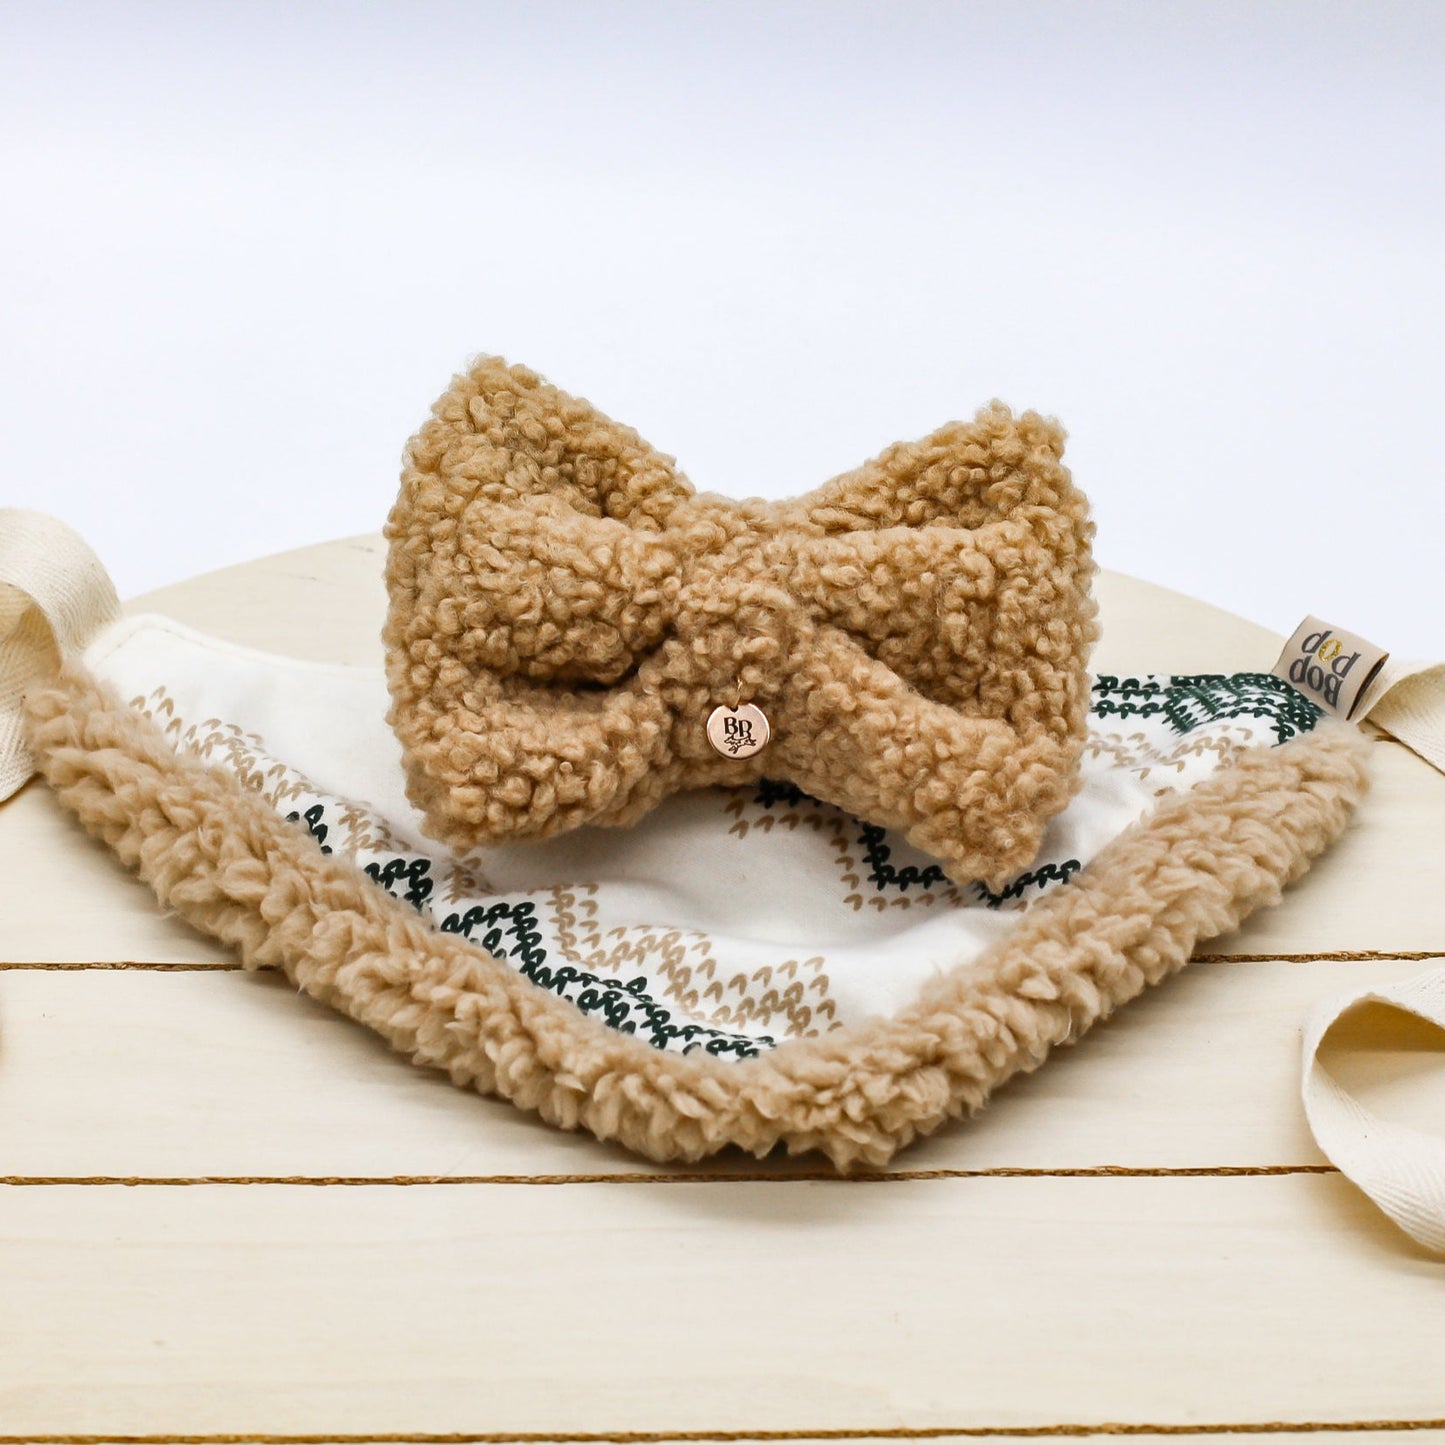 Teddy Sherpa fuzzy puffy Pet Dog Cat bow tie pet accessories caramel mocha brown color soft cozy bows sherpa bandana bop pop pets solid brass hardware snap button easy-to-use comfort